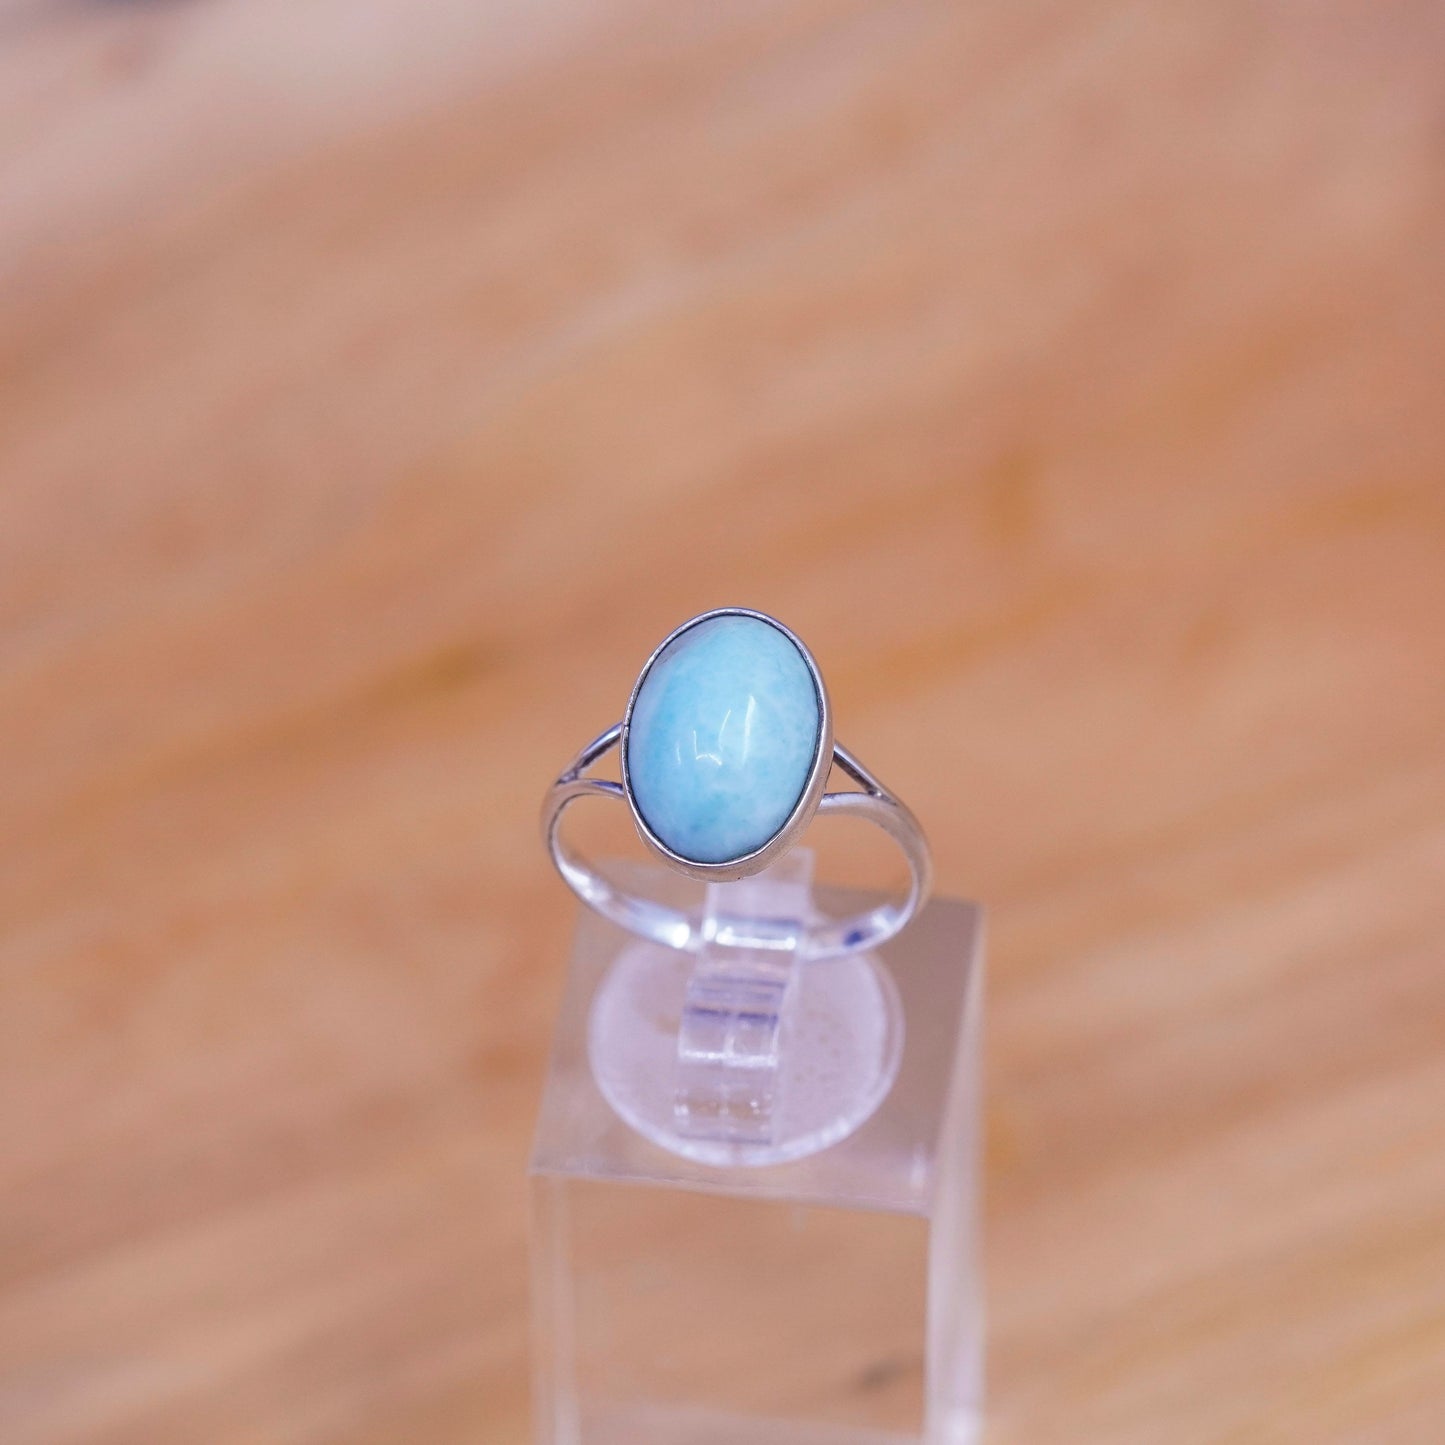 Size 6.5, vintage Sterling 925 silver handmade ring with Larimar